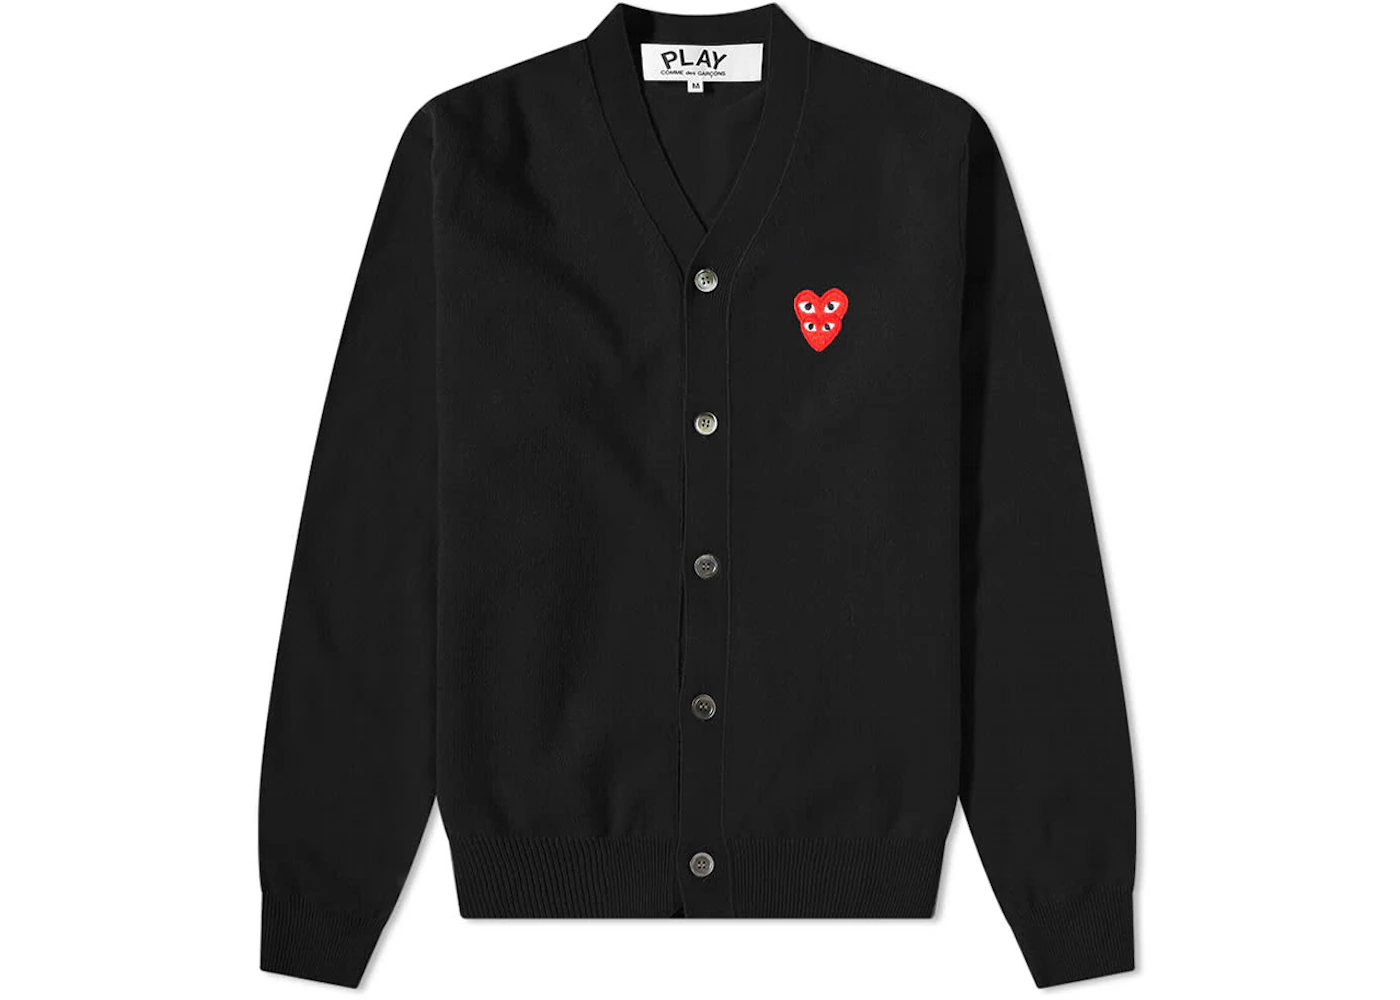 Comme des Garcons Play Overlapping Heart Cardigan Black/Red Men's ...